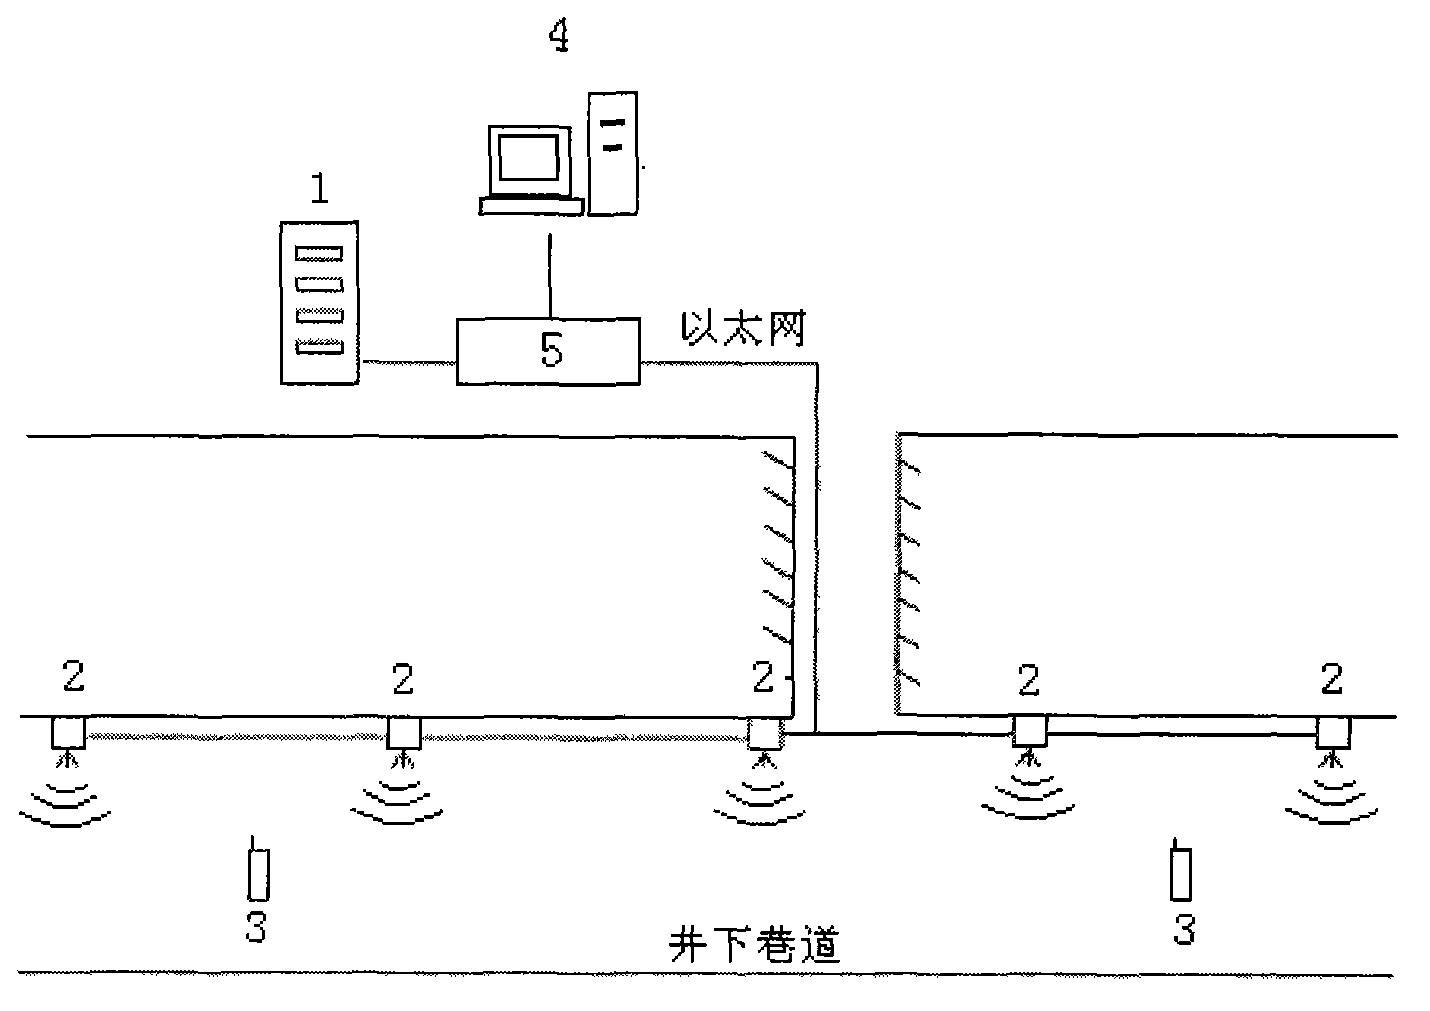 Underground personnel positioning method based field intensity and step-mounting distance measurement